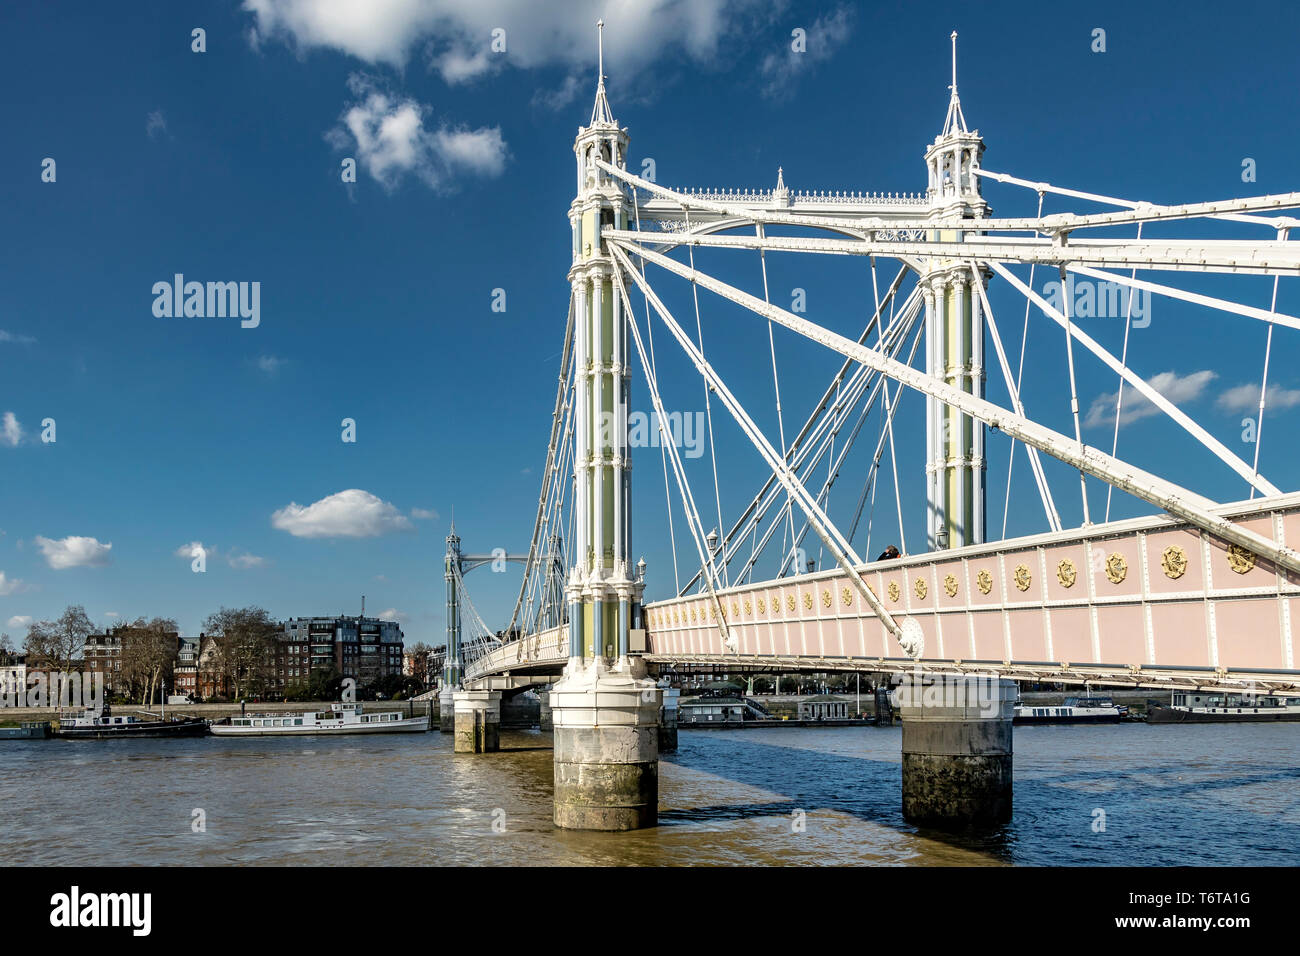 The Albert Bridge, built in 1873, which connects Chelsea on the north side of the River Thames, to Battersea on the south side, London, UK Stock Photo